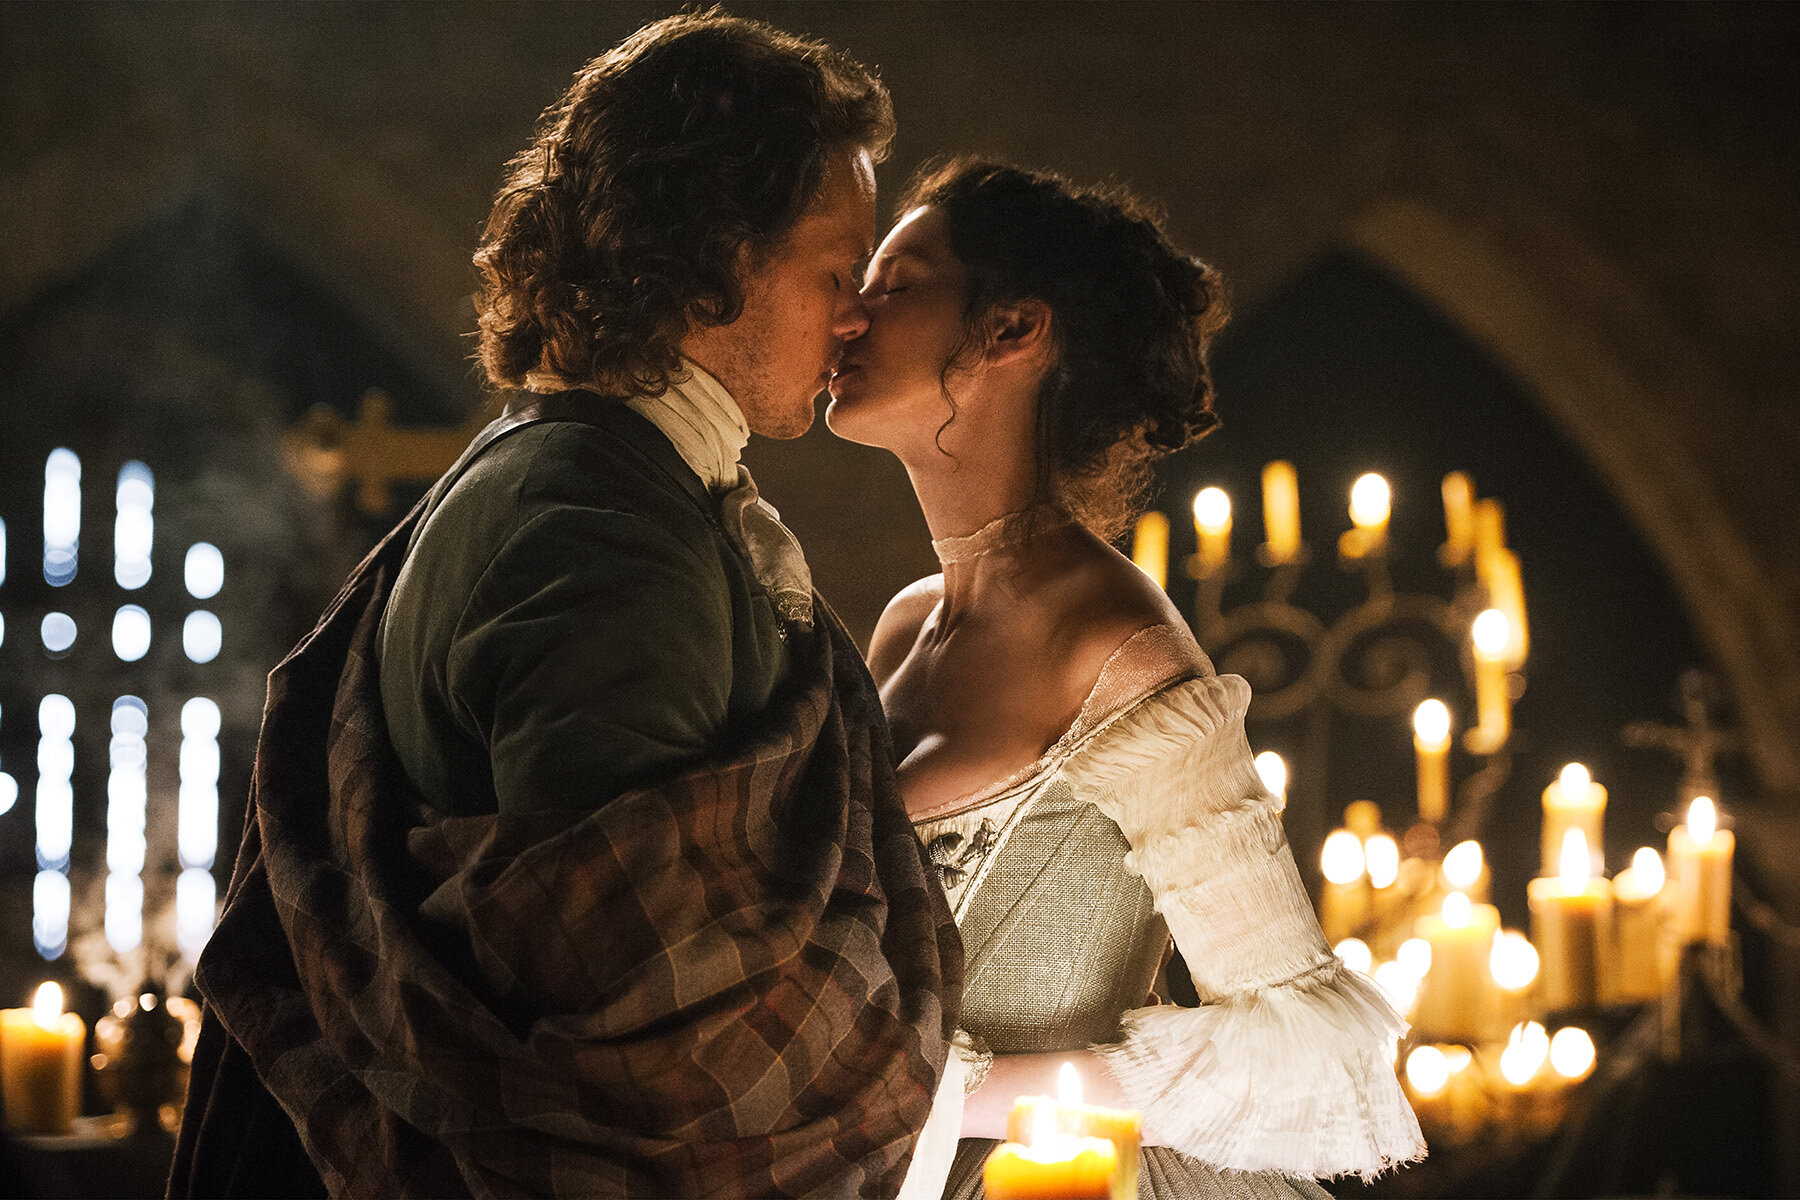 Claire and Jamie have a beautiful wedding in Outlander